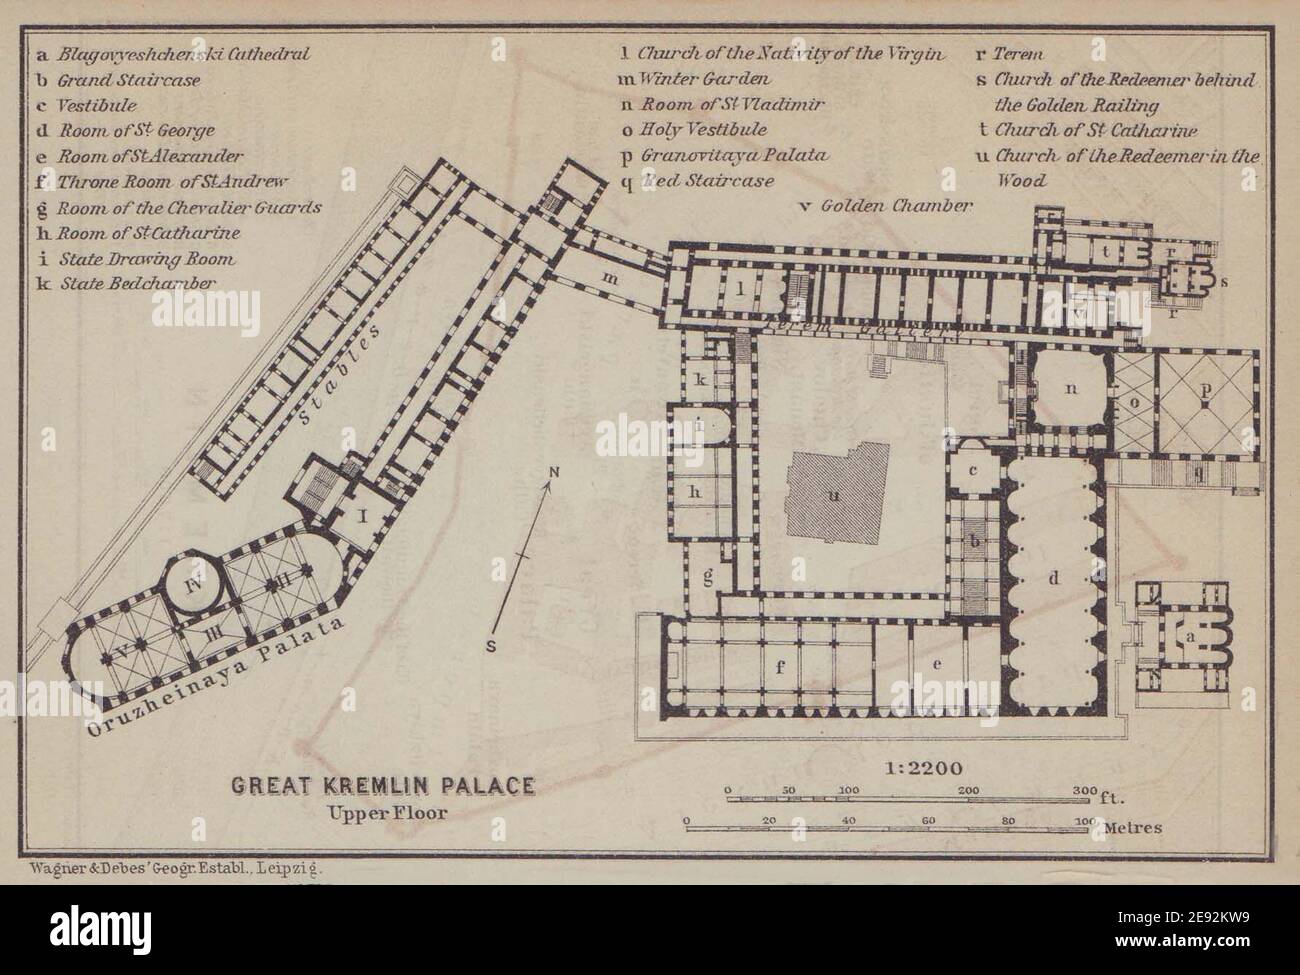 Grand Kremlin Palace, Moscow ground/floor plan. Russia. BAEDEKER 1914 old map Stock Photo